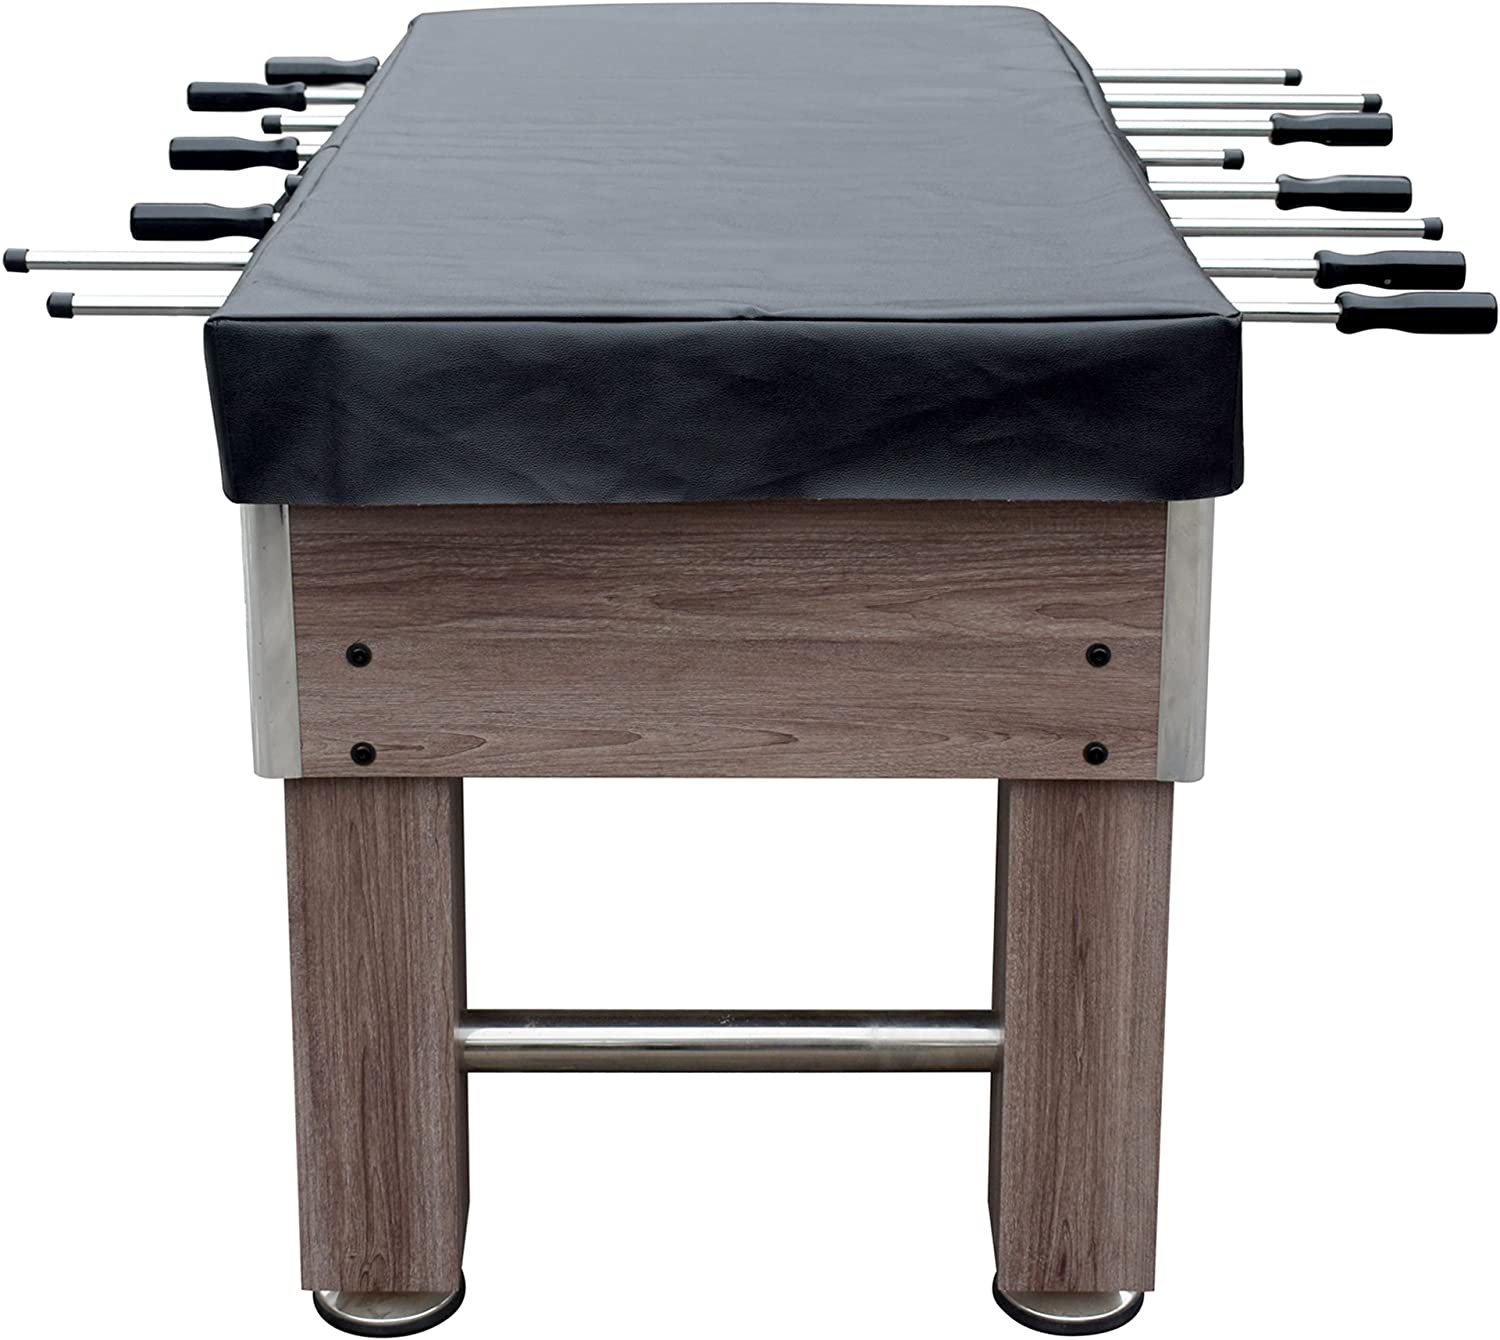 Hathaway Foosball Table Cover - Fits 54-in Table Black